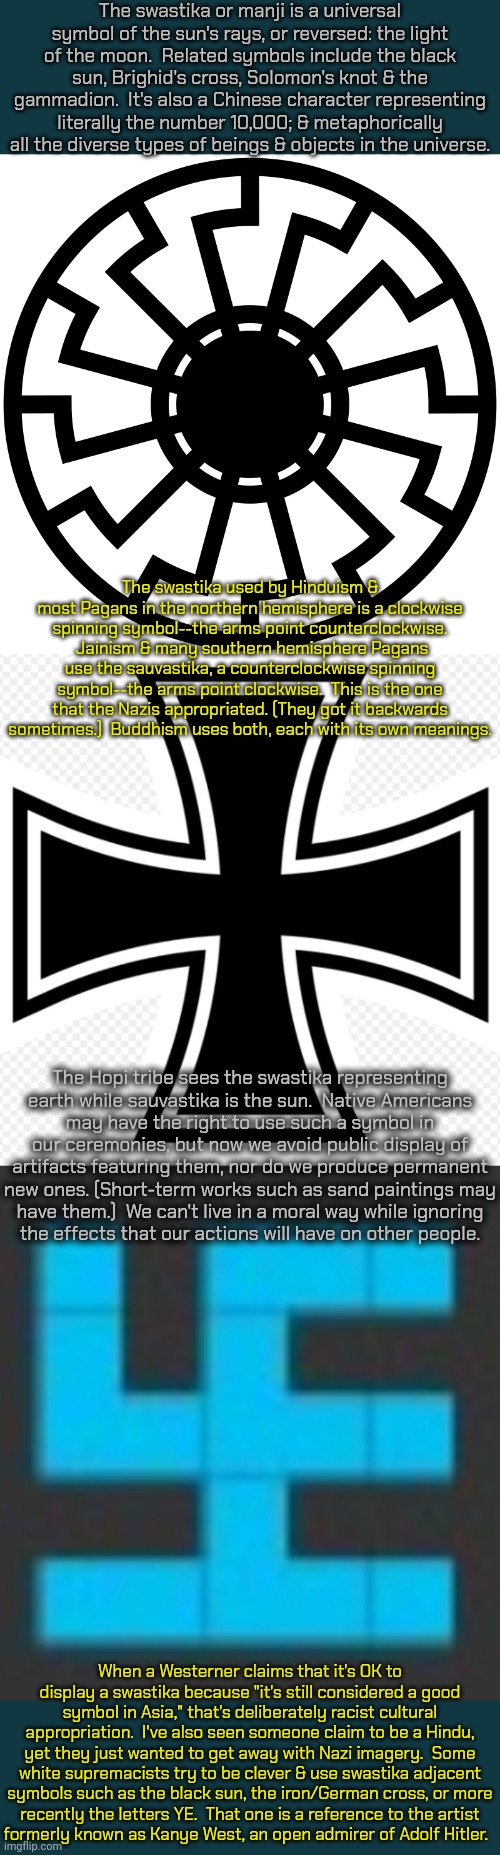 There is no actual swastika in this meme. | The swastika or manji is a universal symbol of the sun's rays, or reversed: the light of the moon.  Related symbols include the black sun, Brighid's cross, Solomon's knot & the gammadion.  It's also a Chinese character representing literally the number 10,000; & metaphorically all the diverse types of beings & objects in the universe. The swastika used by Hinduism & most Pagans in the northern hemisphere is a clockwise spinning symbol--the arms point counterclockwise.  Jainism & many southern hemisphere Pagans use the sauvastika, a counterclockwise spinning symbol--the arms point clockwise.  This is the one that the Nazis appropriated. (They got it backwards sometimes.)  Buddhism uses both, each with its own meanings. The Hopi tribe sees the swastika representing
earth while sauvastika is the sun.  Native Americans
may have the right to use such a symbol in our ceremonies, but now we avoid public display of artifacts featuring them, nor do we produce permanent new ones. (Short-term works such as sand paintings may
have them.)  We can't live in a moral way while ignoring
the effects that our actions will have on other people. When a Westerner claims that it's OK to display a swastika because "it's still considered a good symbol in Asia," that's deliberately racist cultural appropriation.  I've also seen someone claim to be a Hindu, yet they just wanted to get away with Nazi imagery.  Some white supremacists try to be clever & use swastika adjacent symbols such as the black sun, the iron/German cross, or more
recently the letters YE.  That one is a reference to the artist
formerly known as Kanye West, an open admirer of Adolf Hitler. | image tagged in black sun,more iron cross,swastikaguy,white supremacists,hate speech,history | made w/ Imgflip meme maker